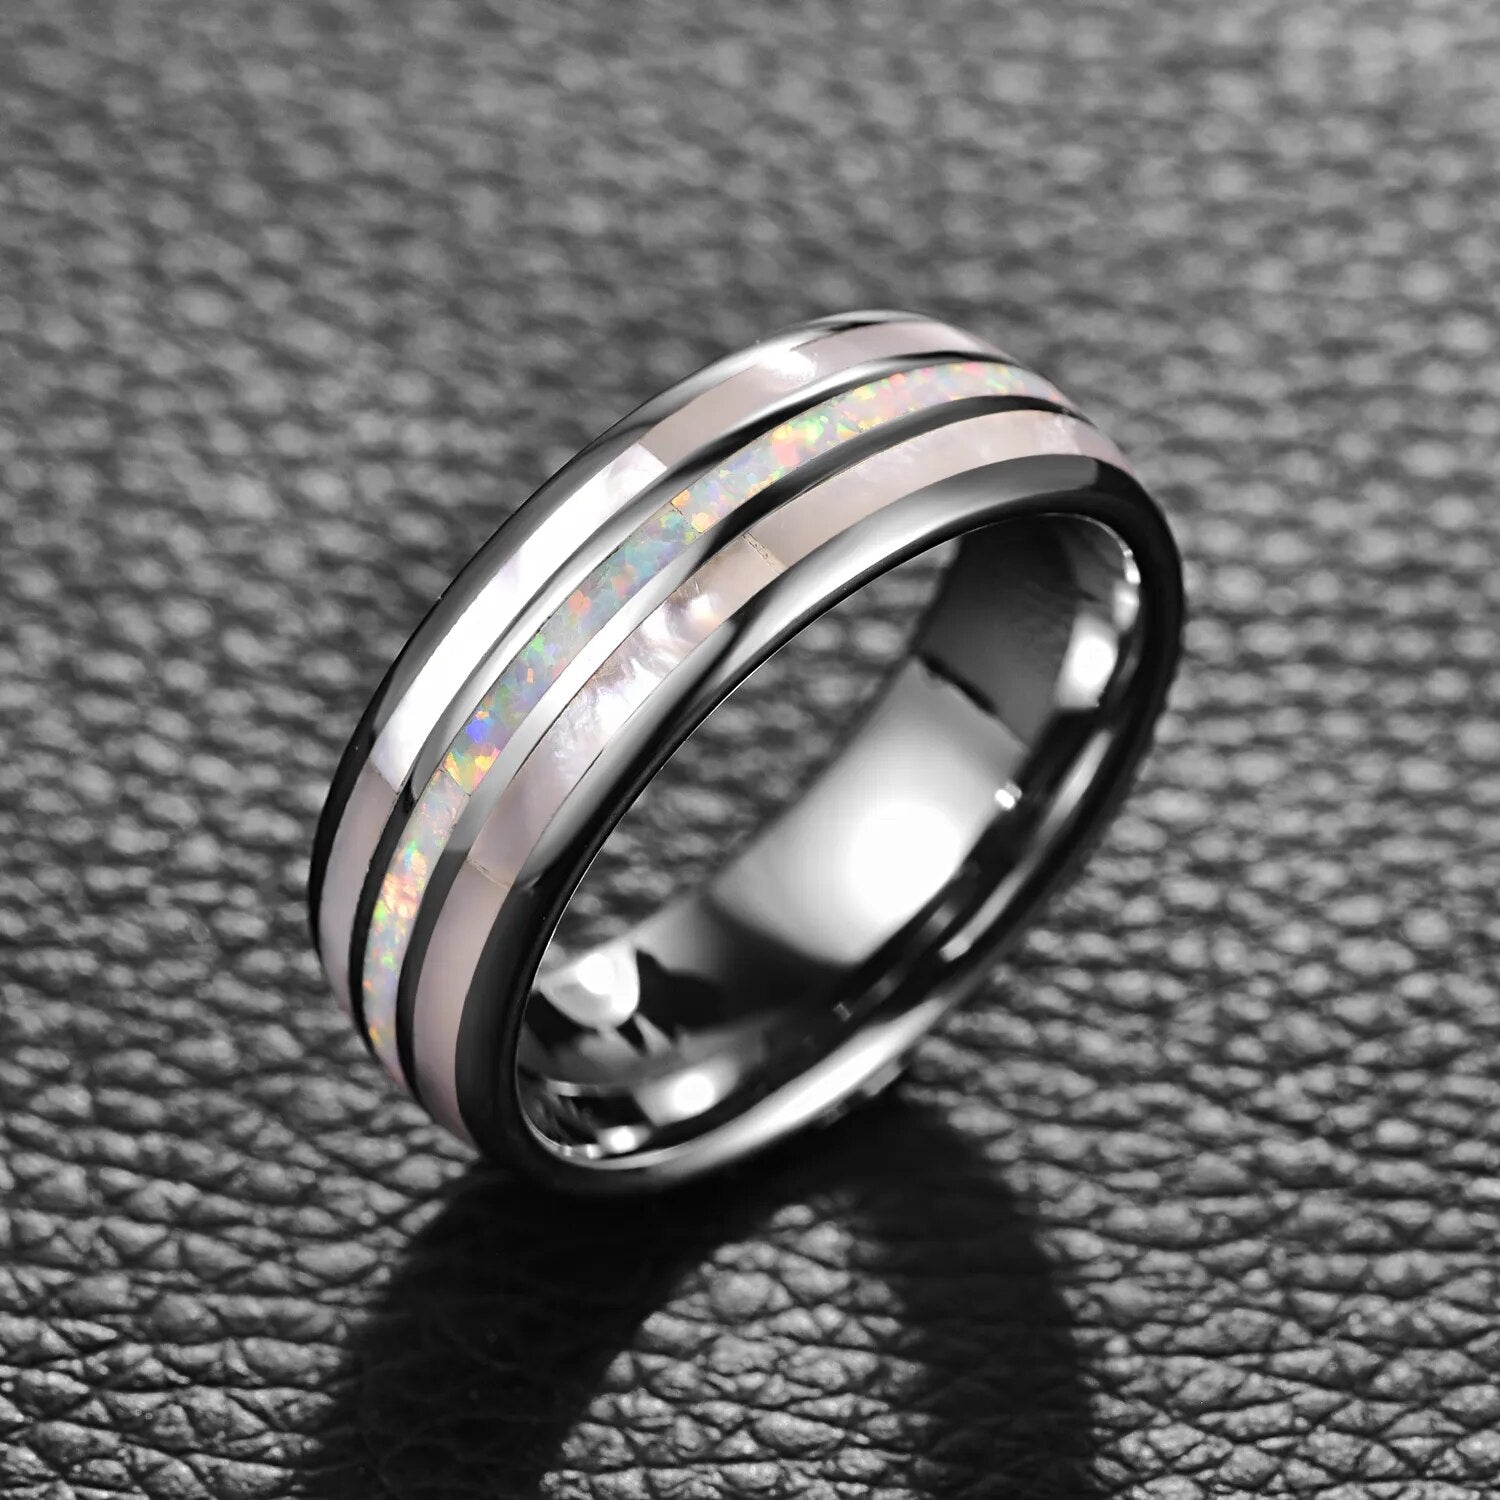 Norse Winter 8mm wide Tungsten Carbide Ring with White Opal Inlay